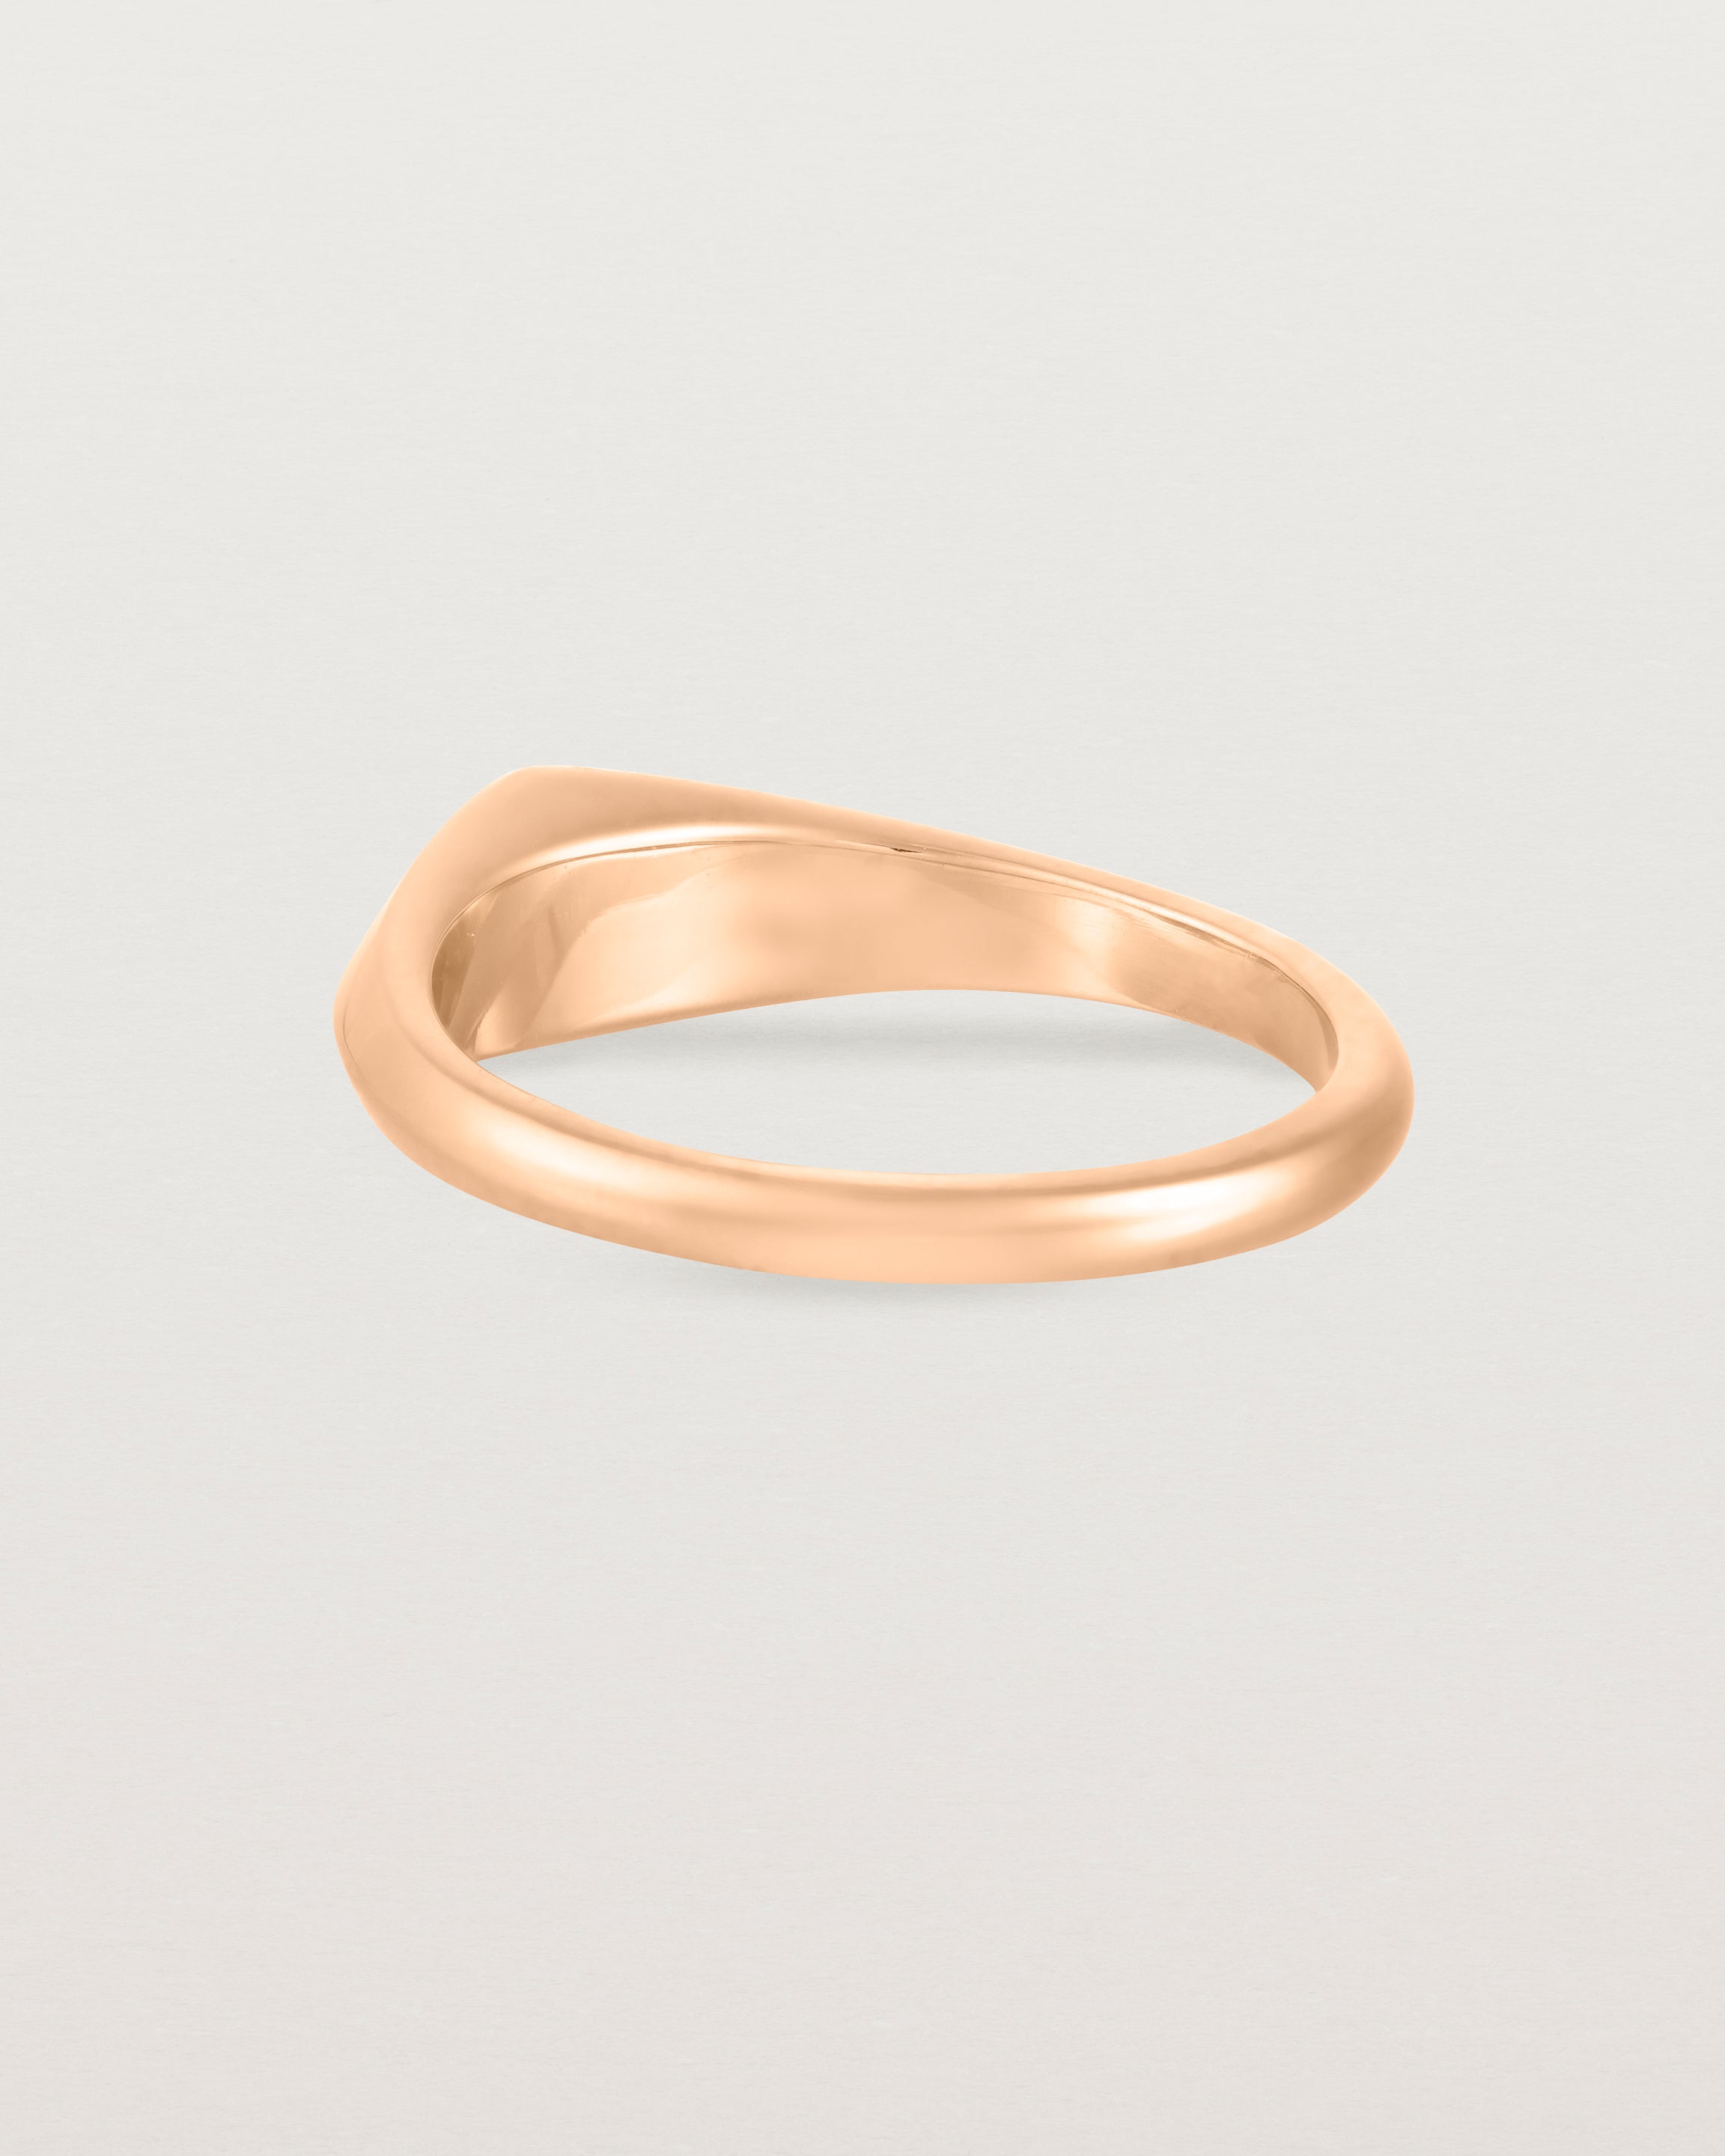 Back view of the Nuna Signet Ring | Rose Gold.